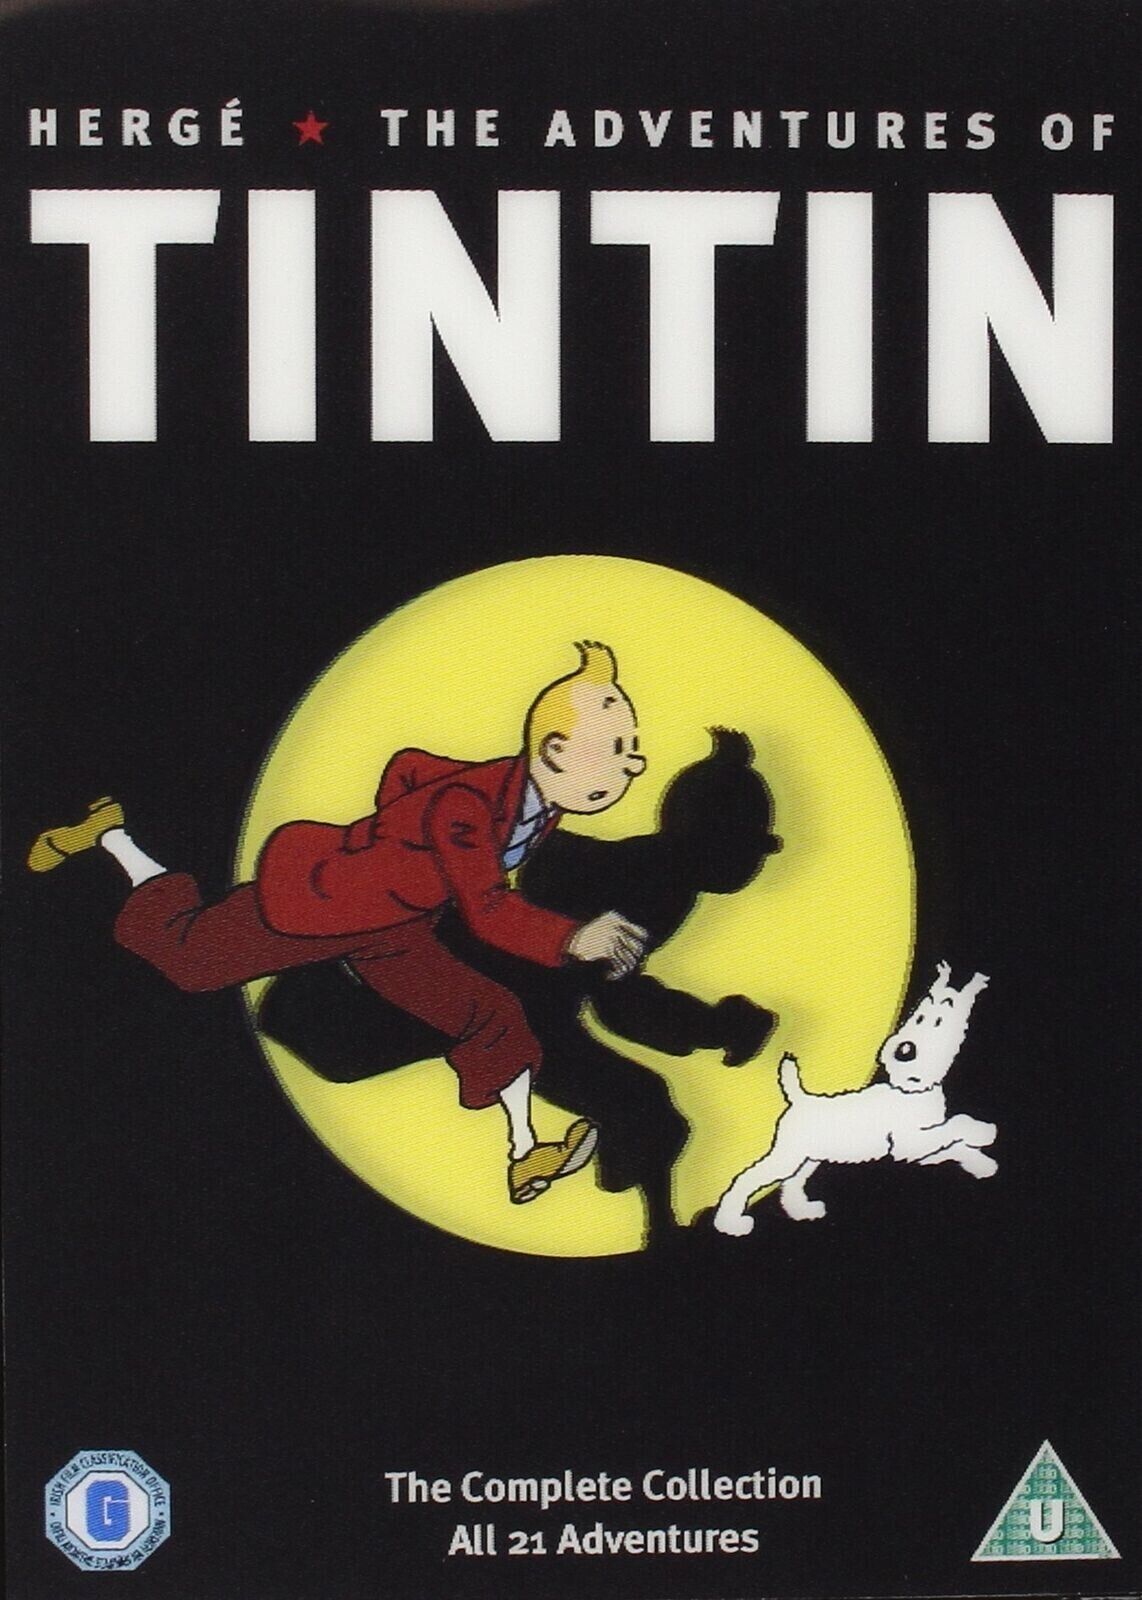 Primary image for Hergé - The Adventures of Tintin The Complete Collection (5-DVD Set)